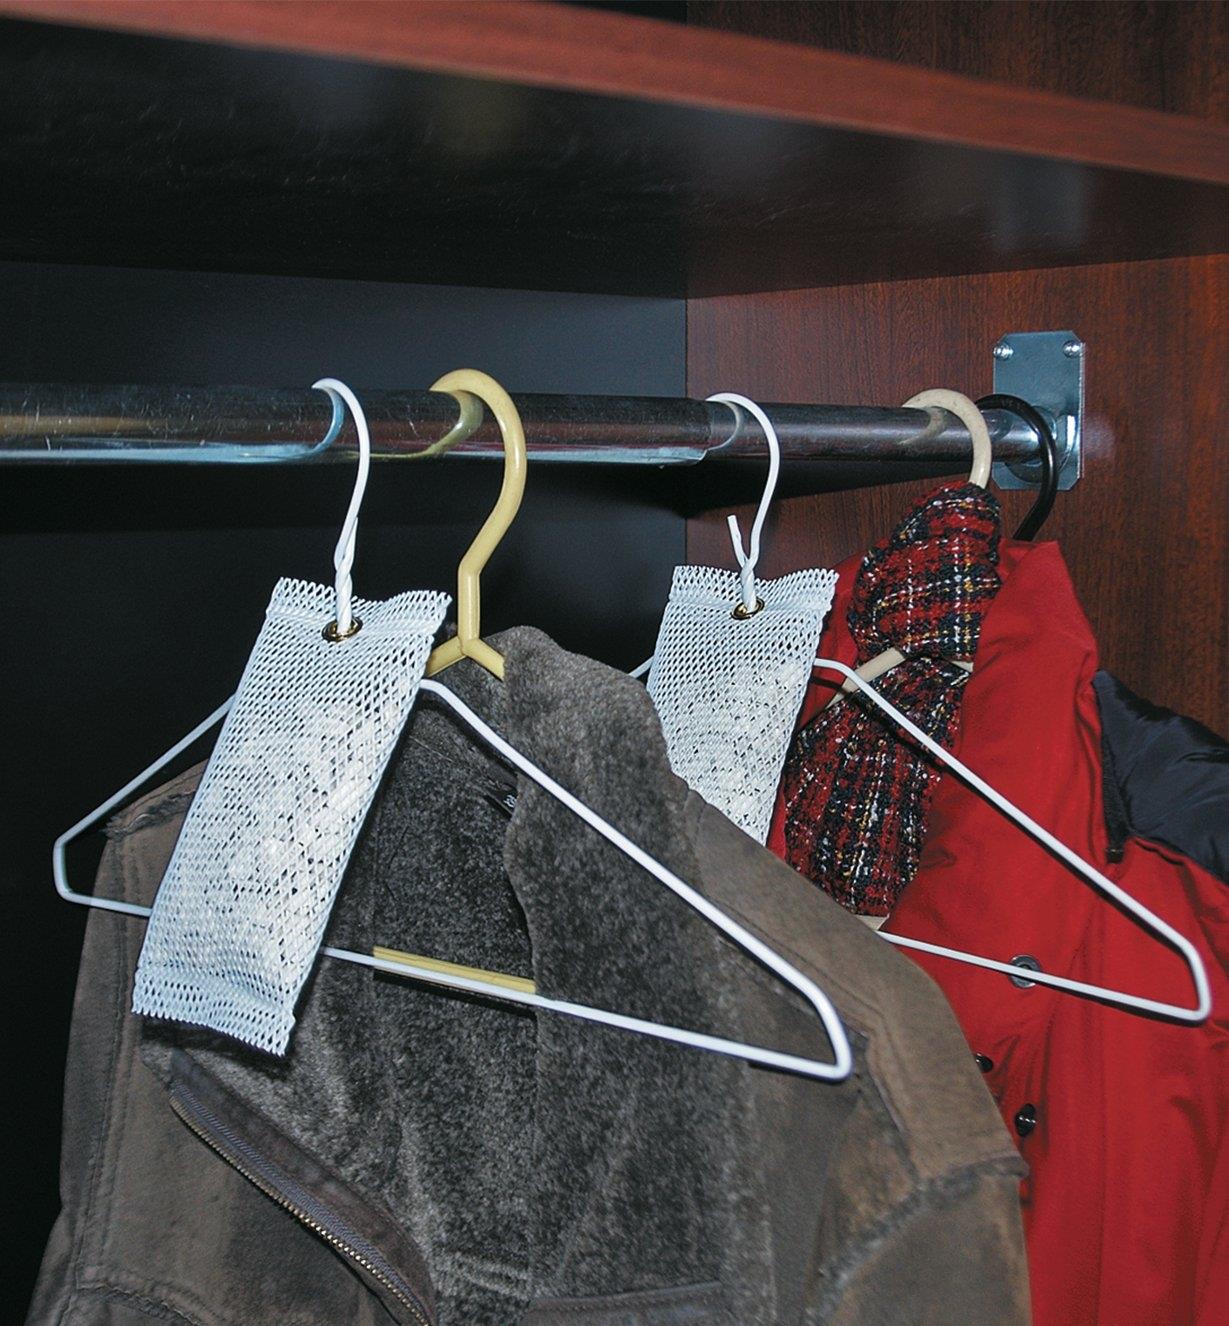 4 oz Deodorizers hanging from clothes hangers in a coat closet